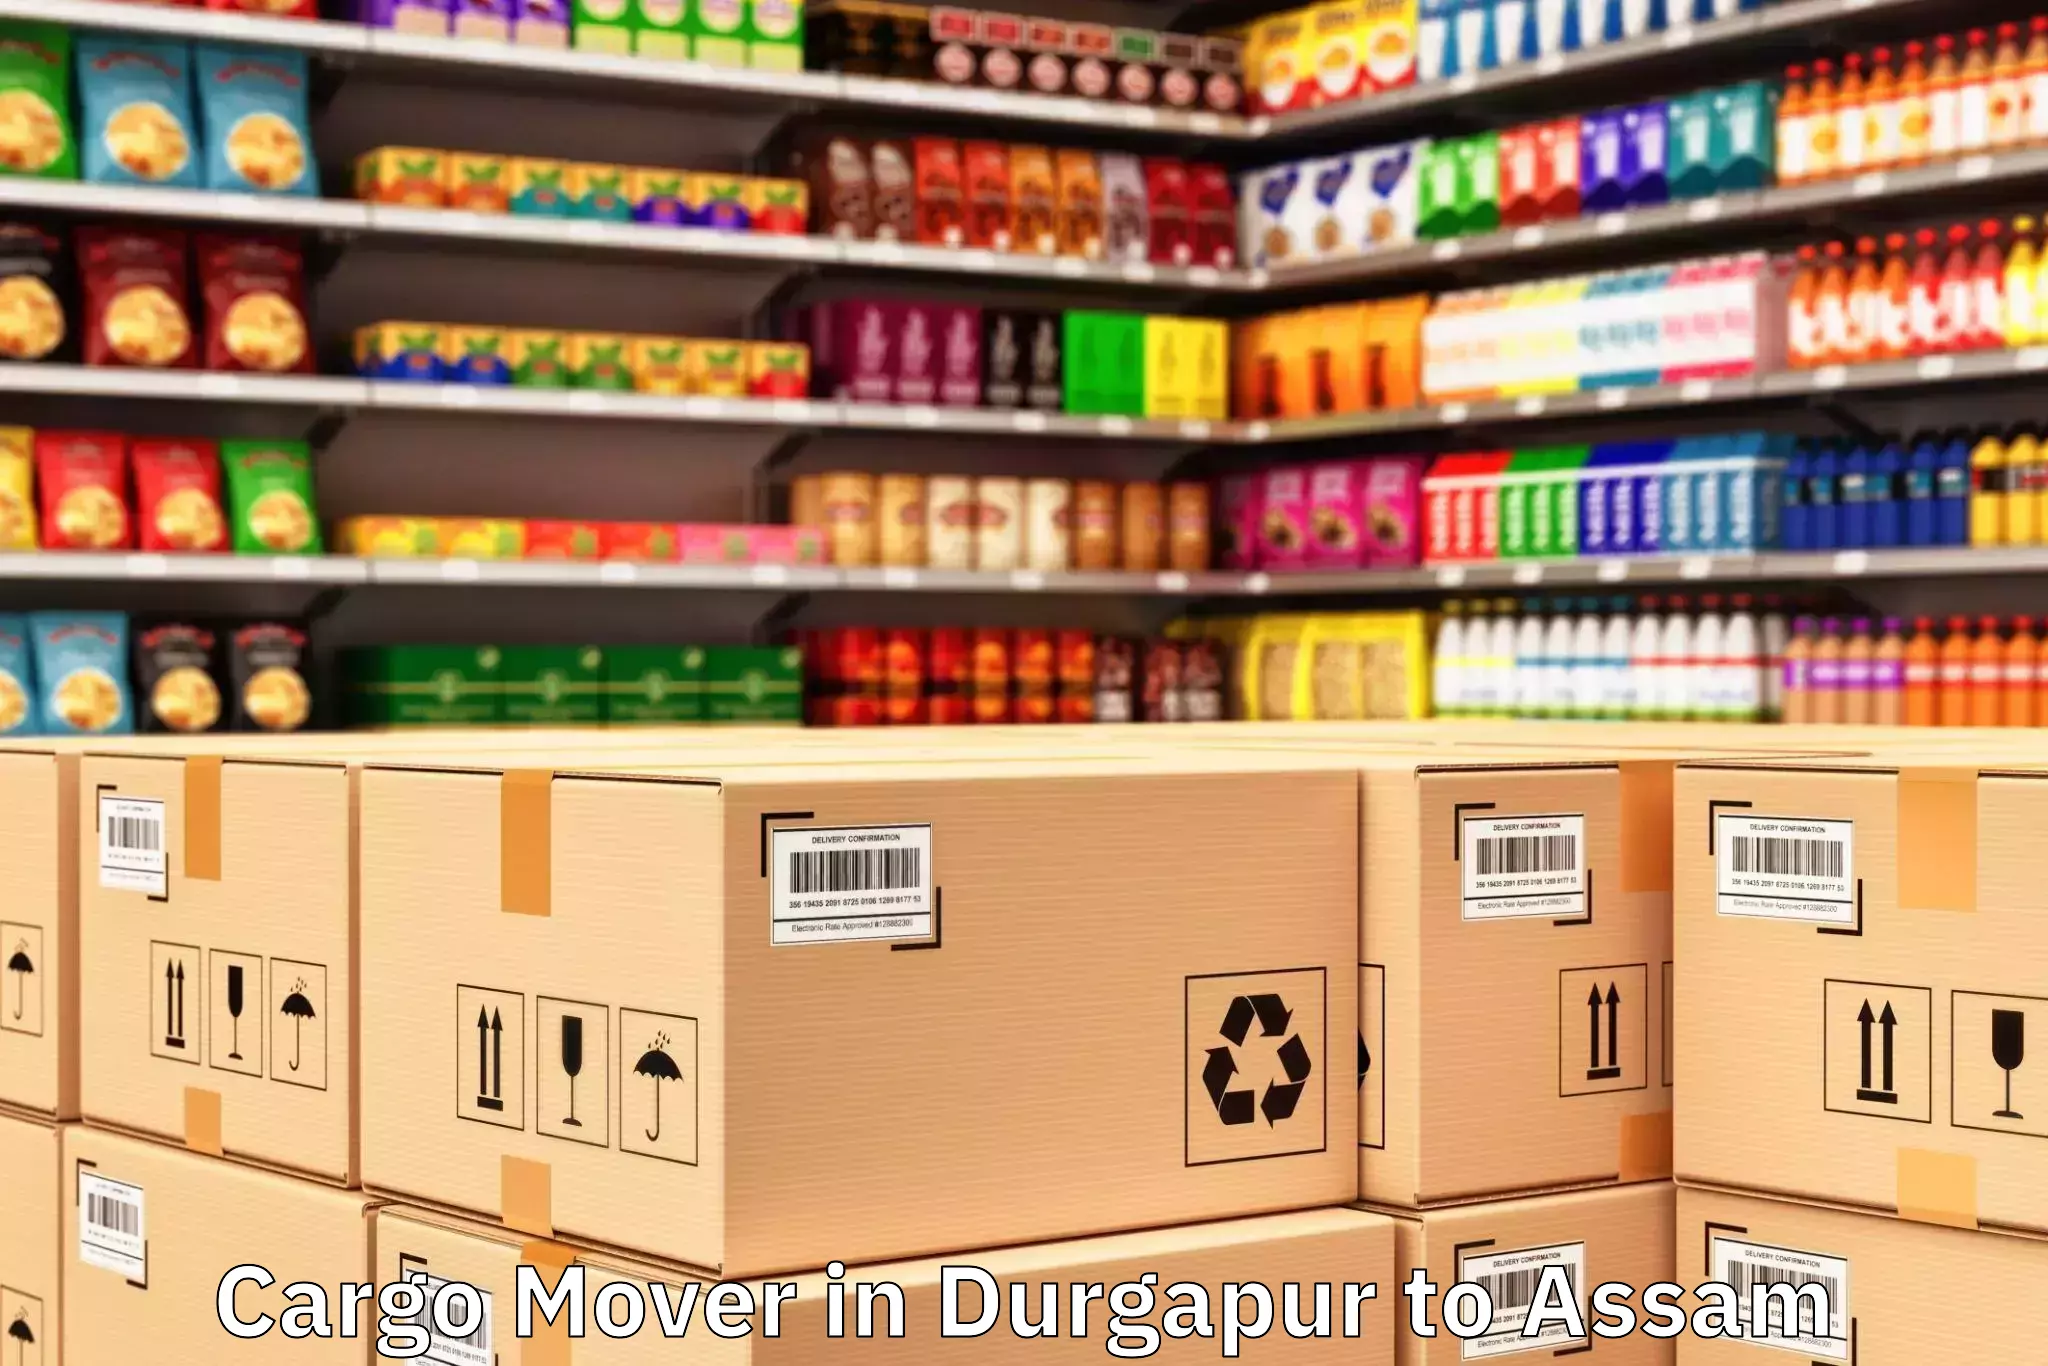 Top Durgapur to Assam Cargo Mover Available